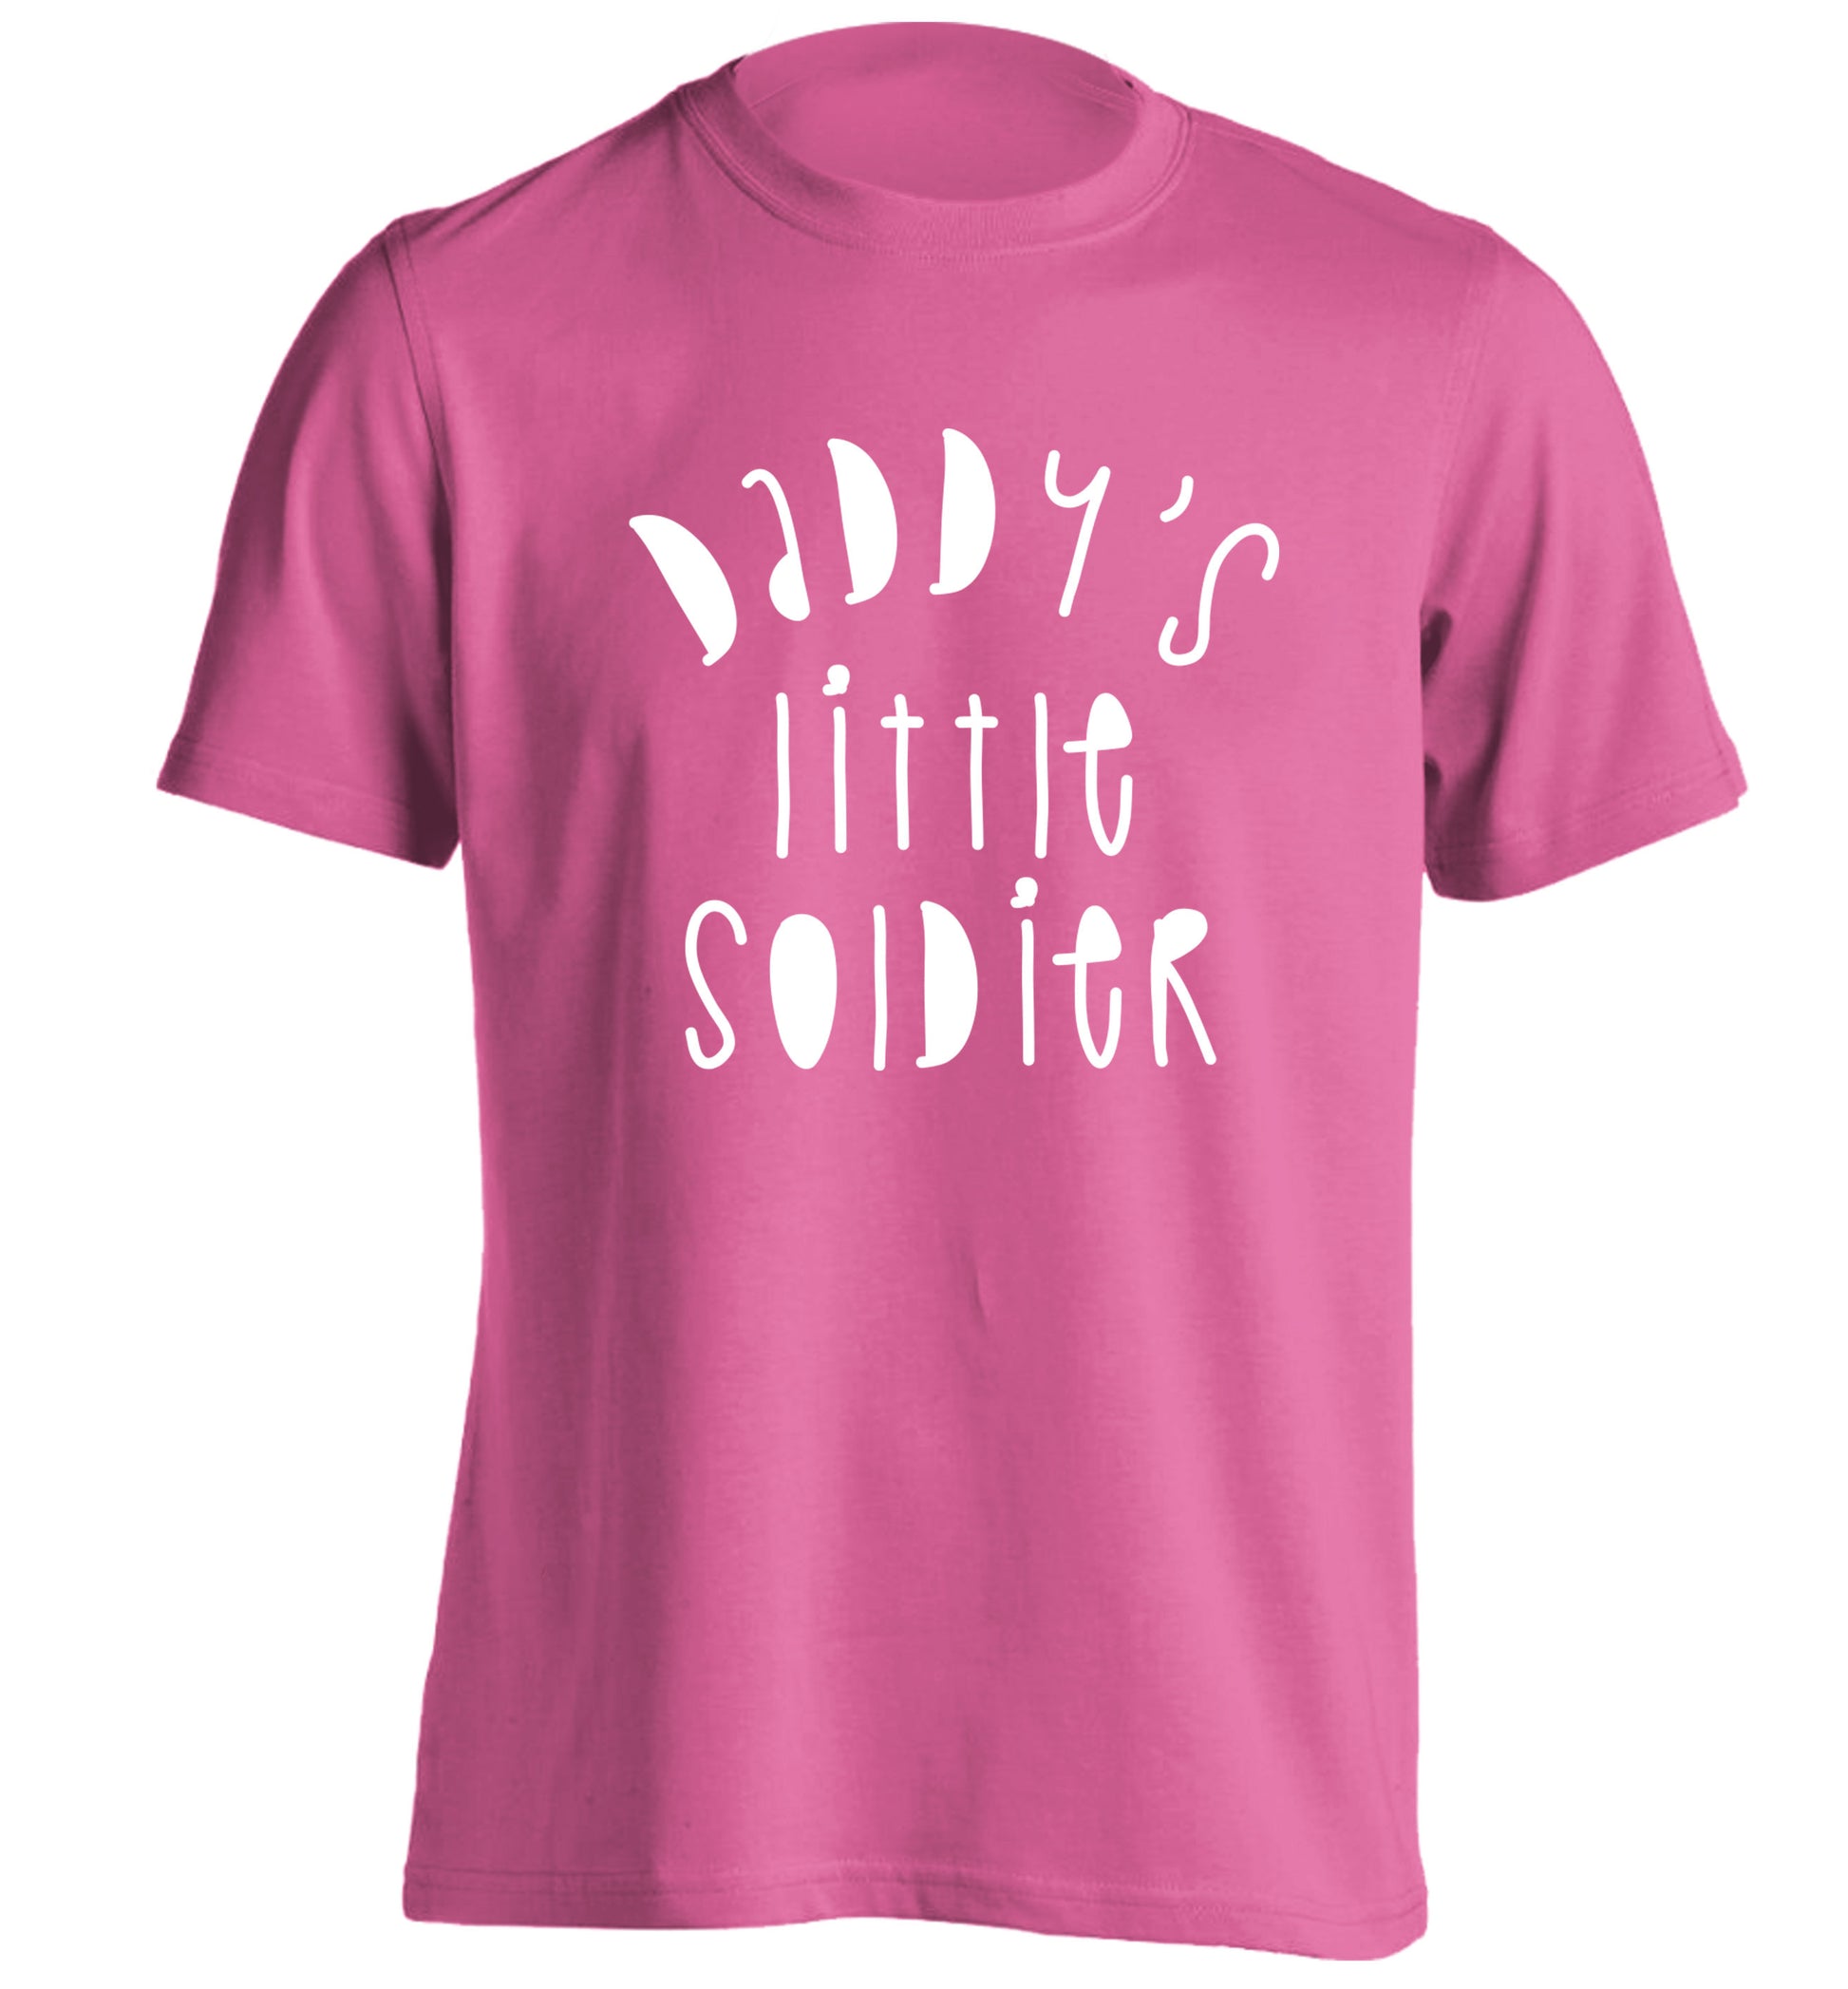 Daddy's little soldier adults unisex pink Tshirt 2XL